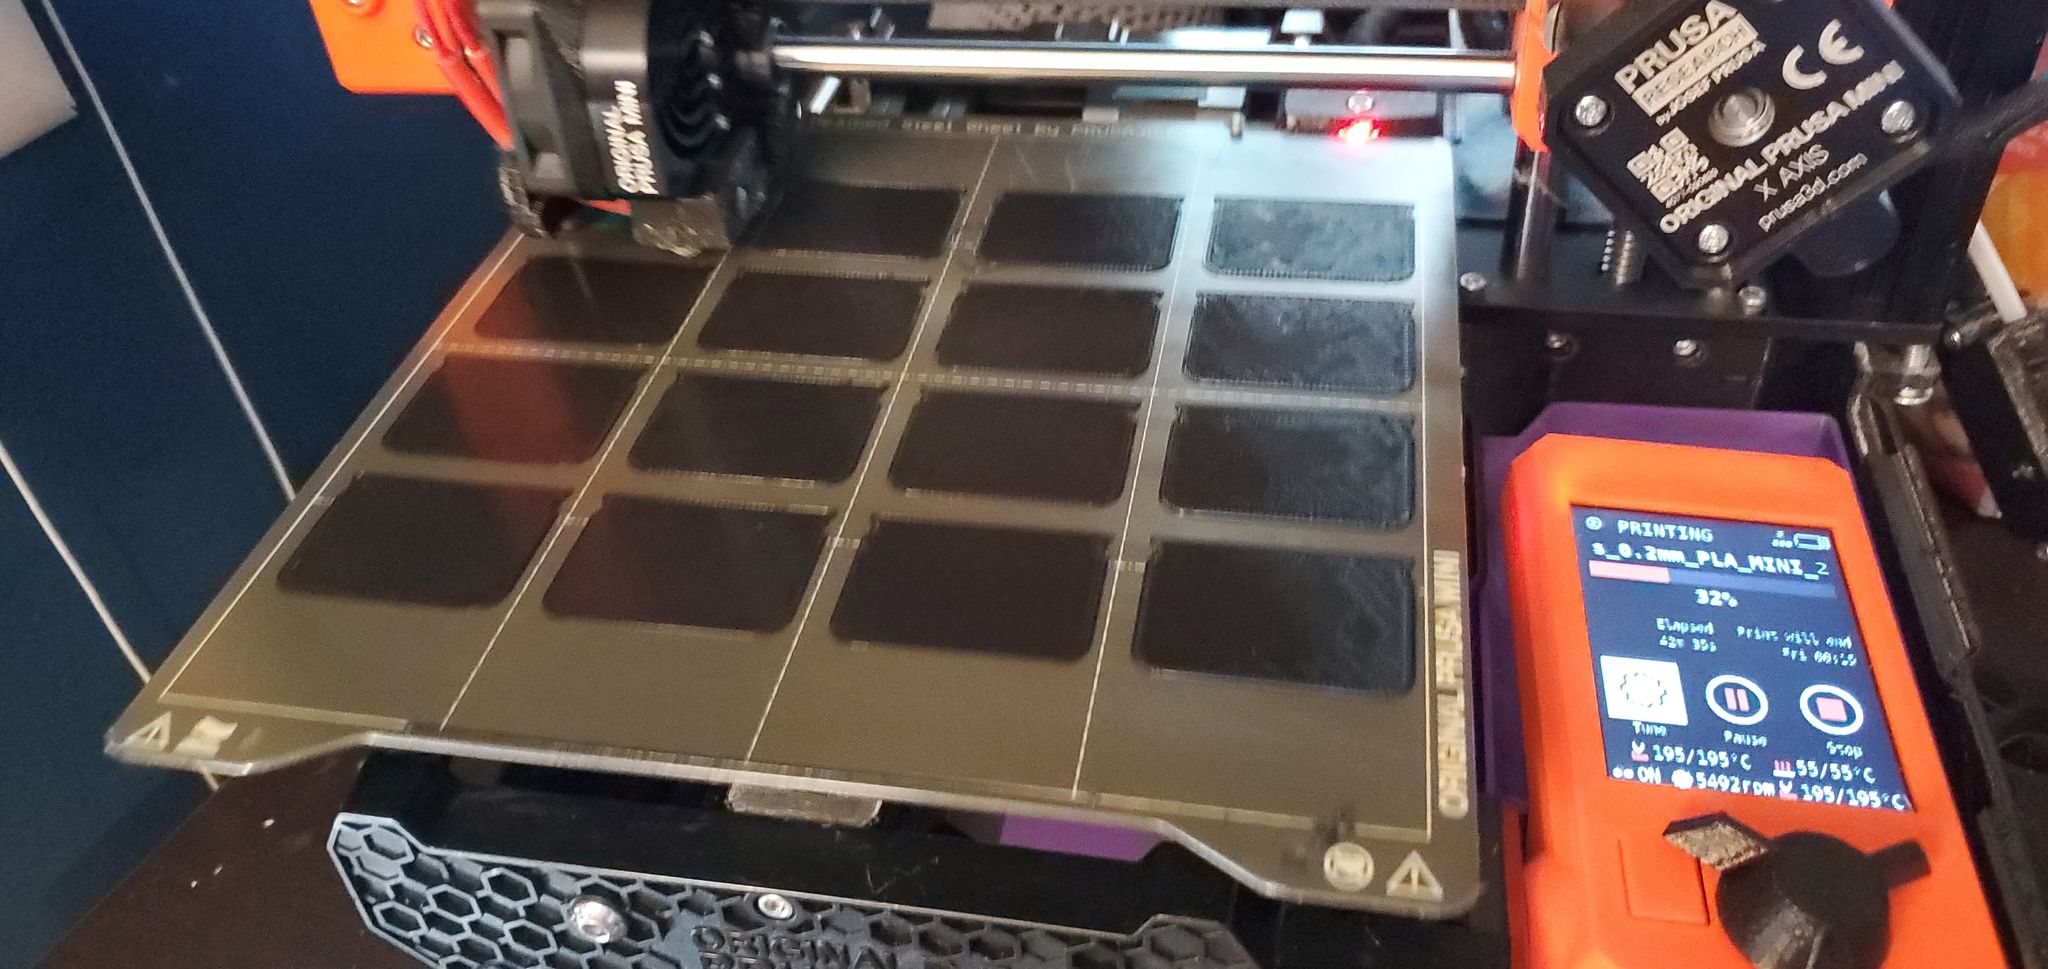 Prusa Slicer Top Layer & Infill Samples for the Mini